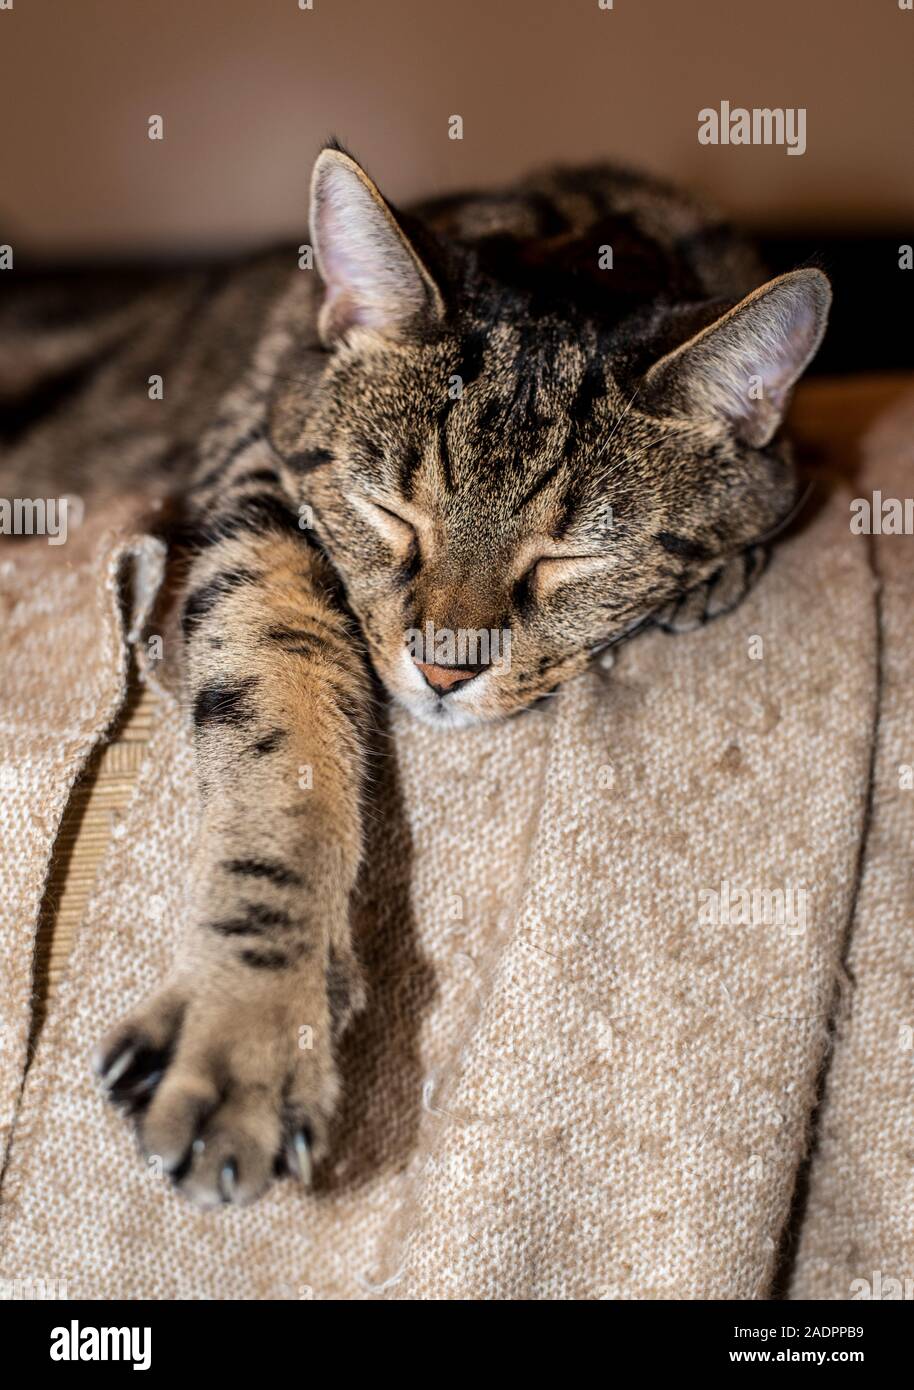 Adorable pet cat sleeps with paw outstretched Stock Photo